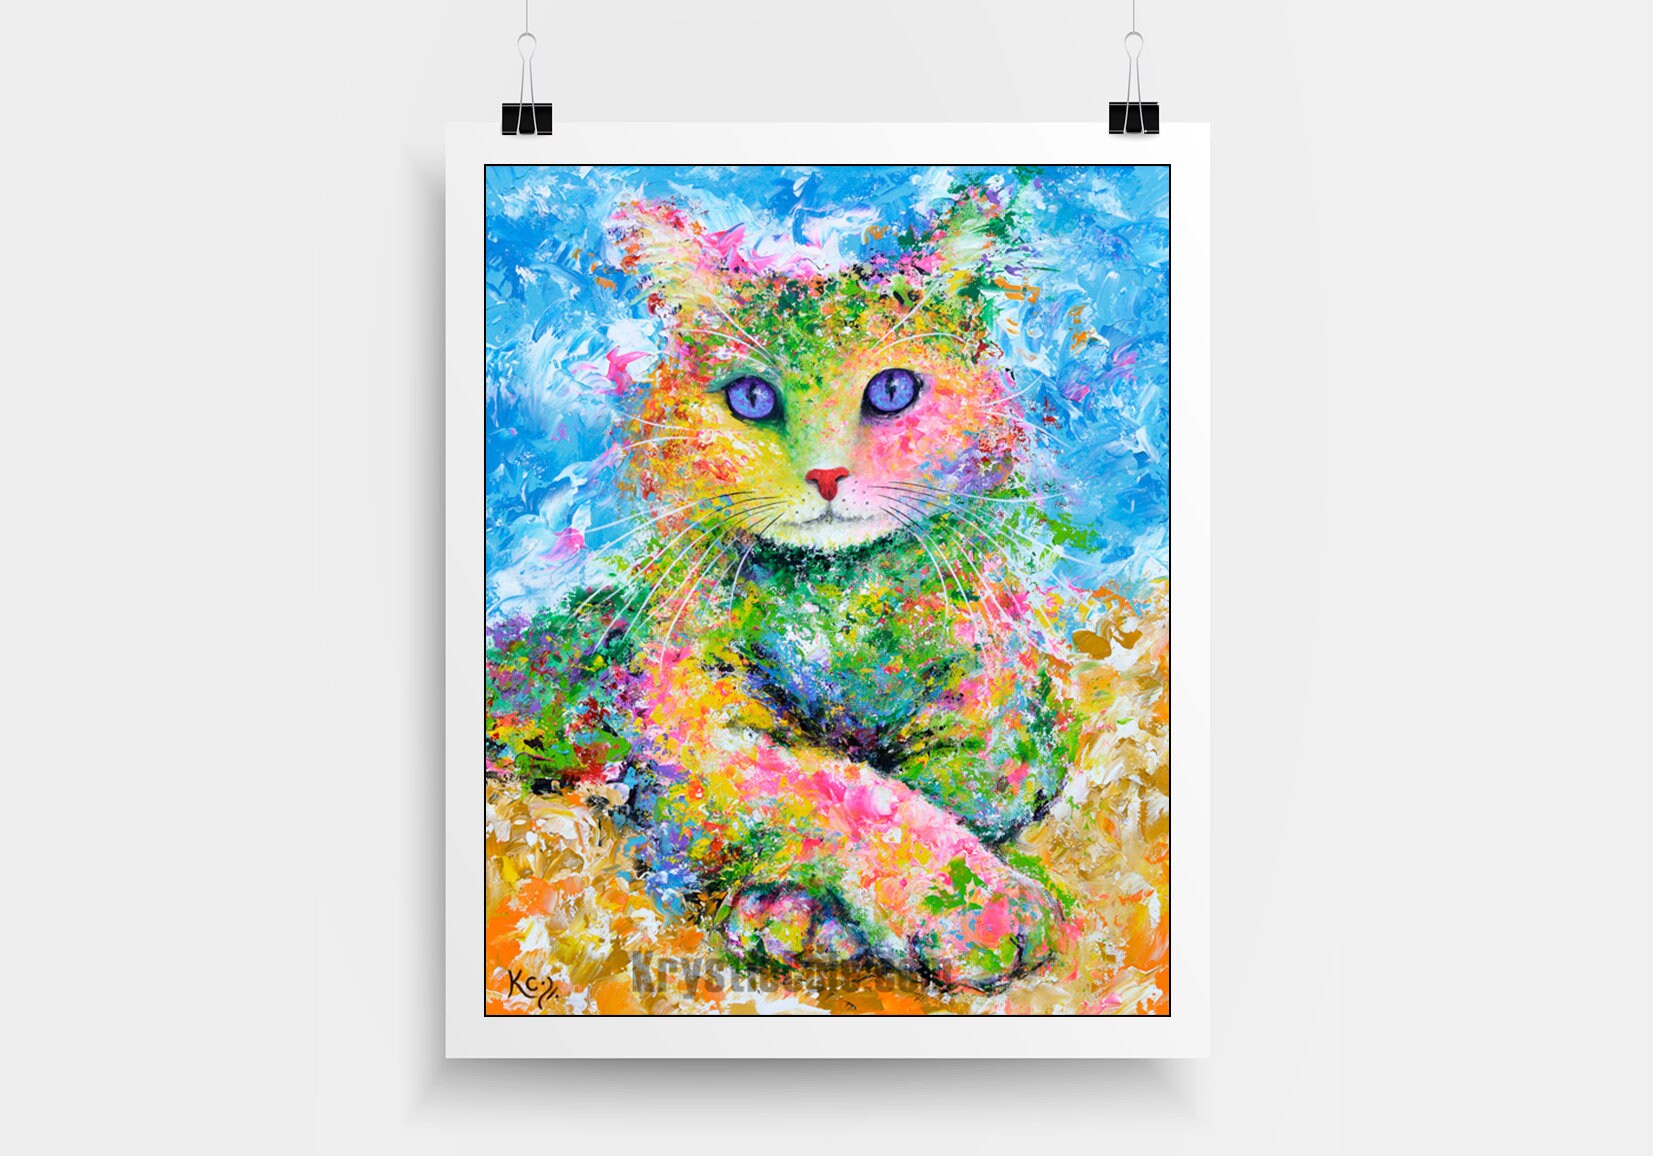 Cat Painting - Cat Print on CANVAS or PAPER. Beautiful Cat Art by Krystle Cole